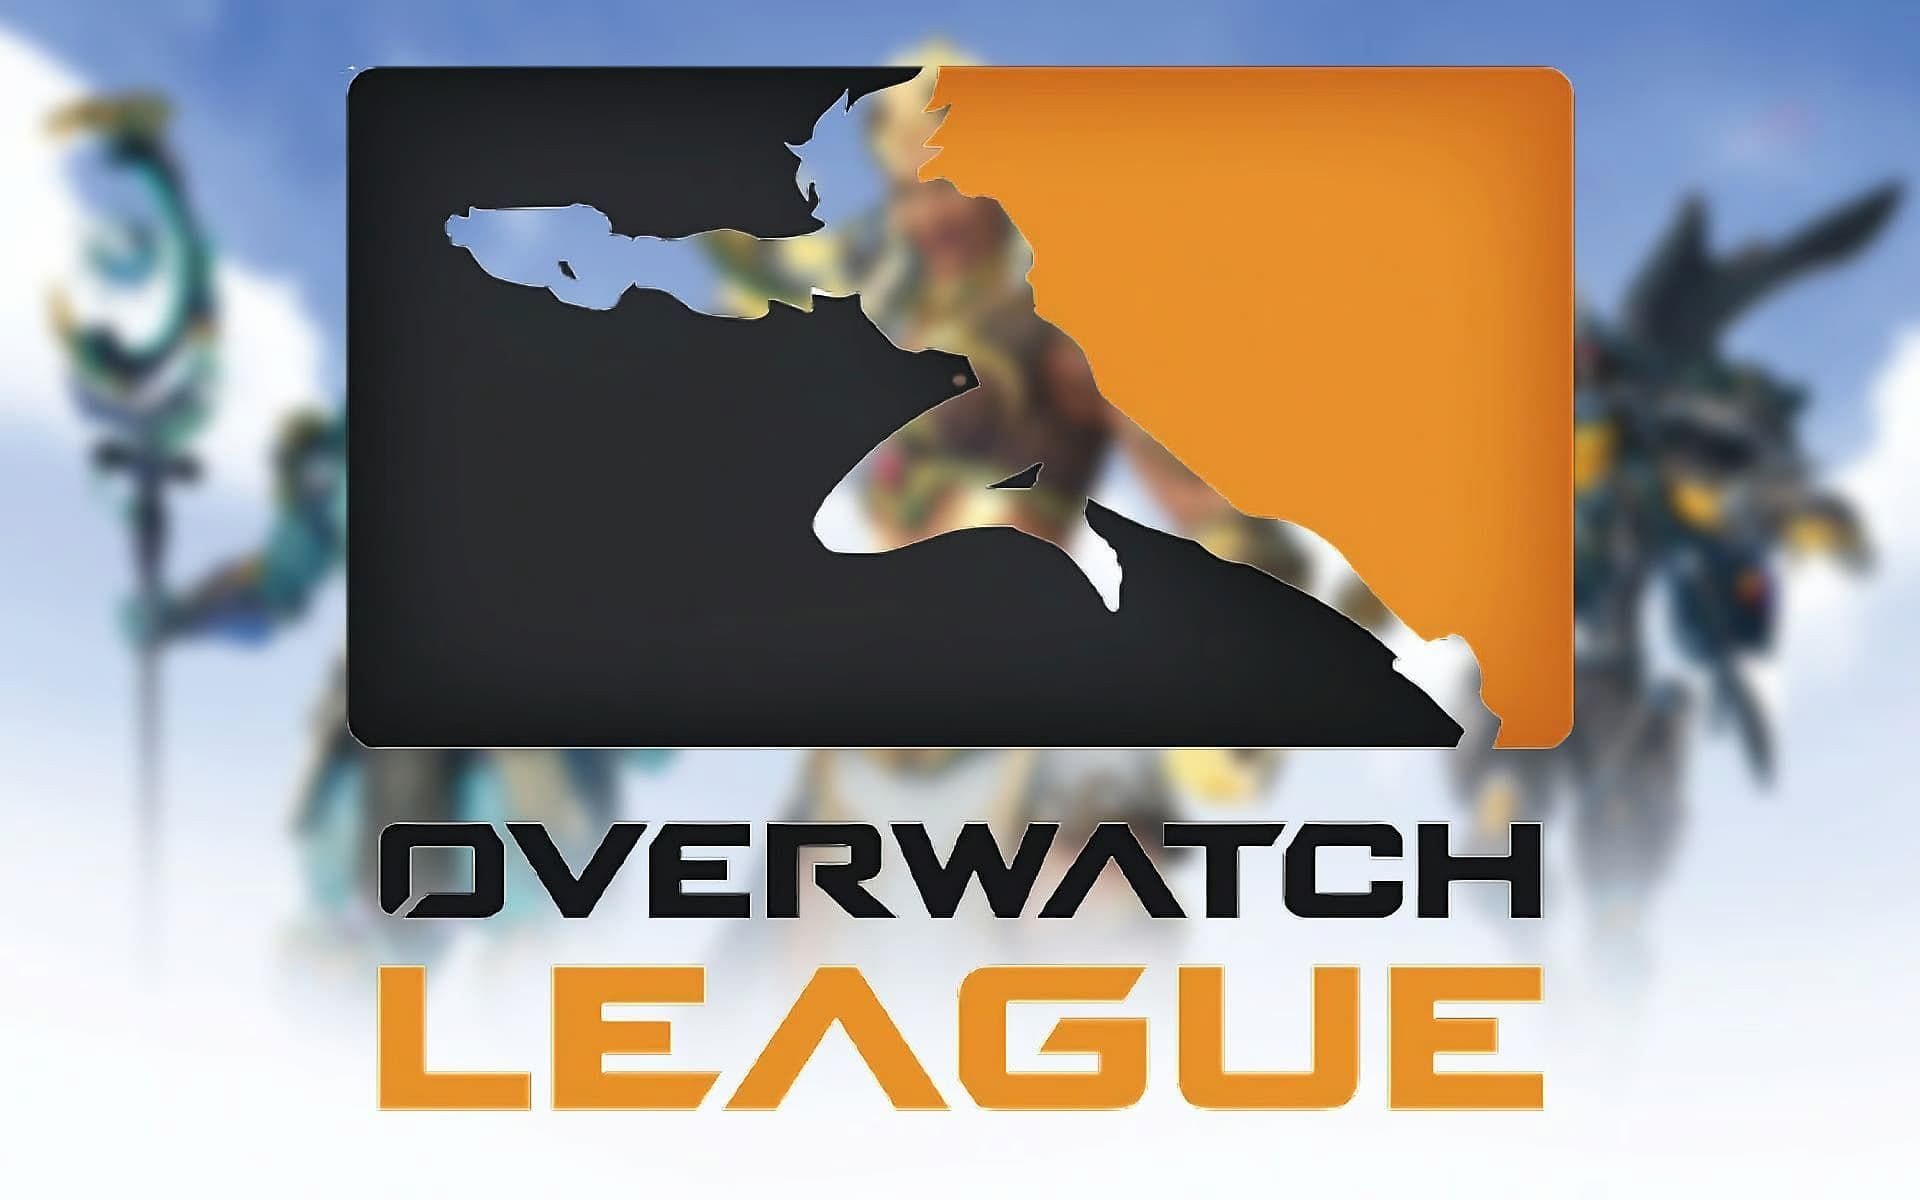 The future of Overwatch League might be in jeopardy (Image via Blizzard)